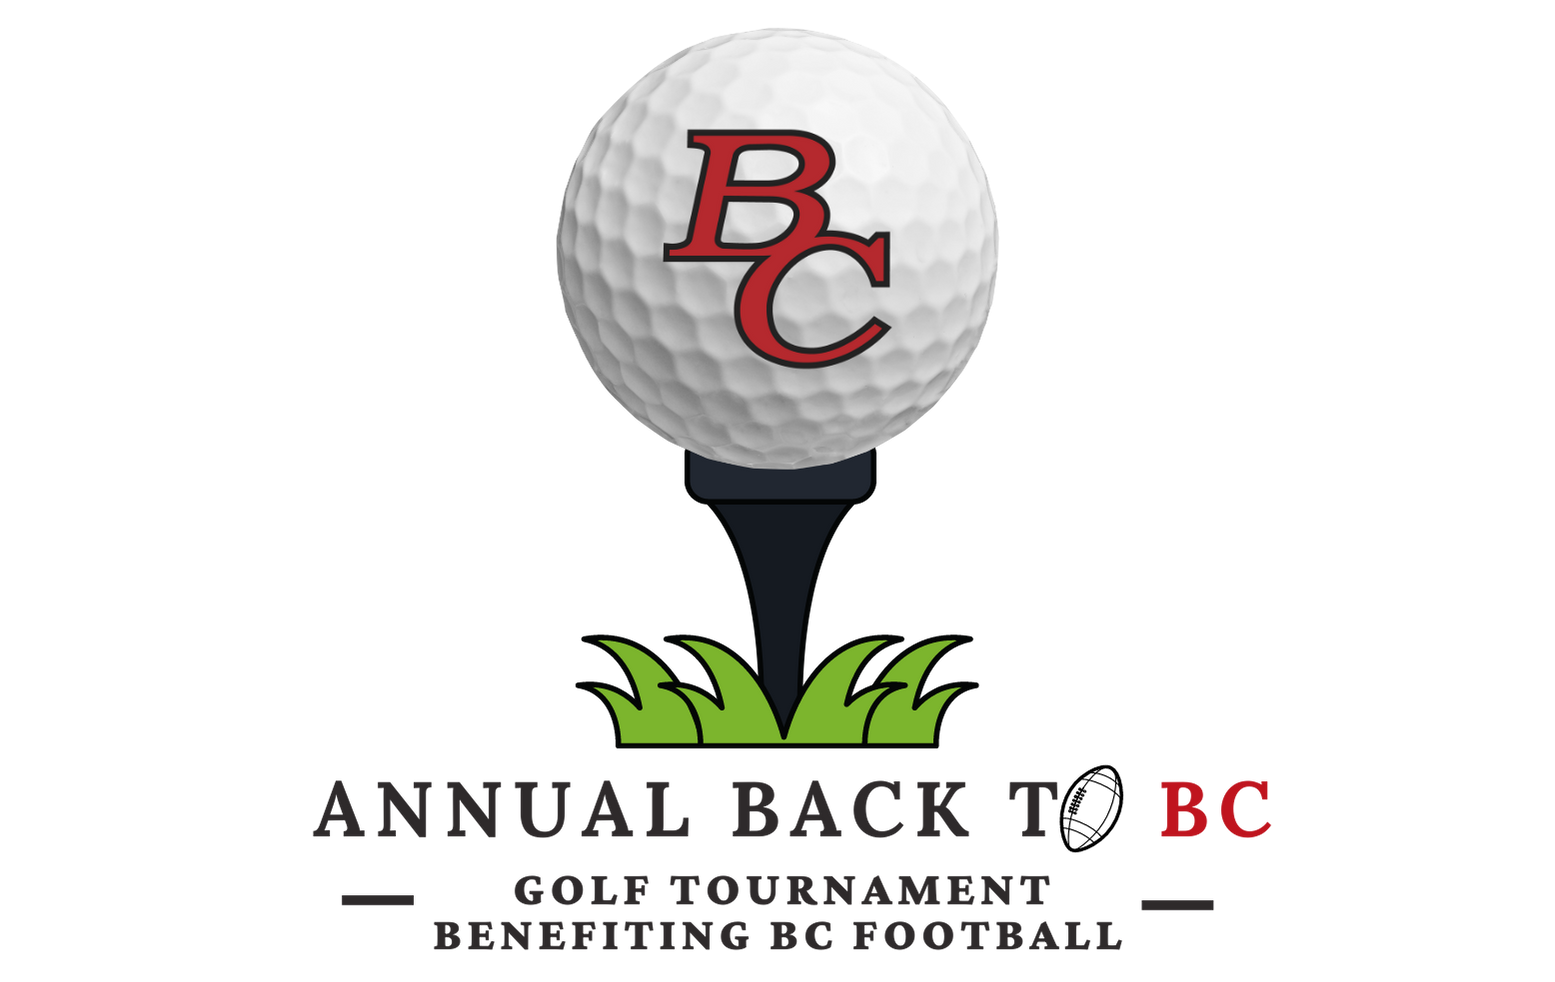 Annual Back to BC Golf Tournament benefiting BC Football logo